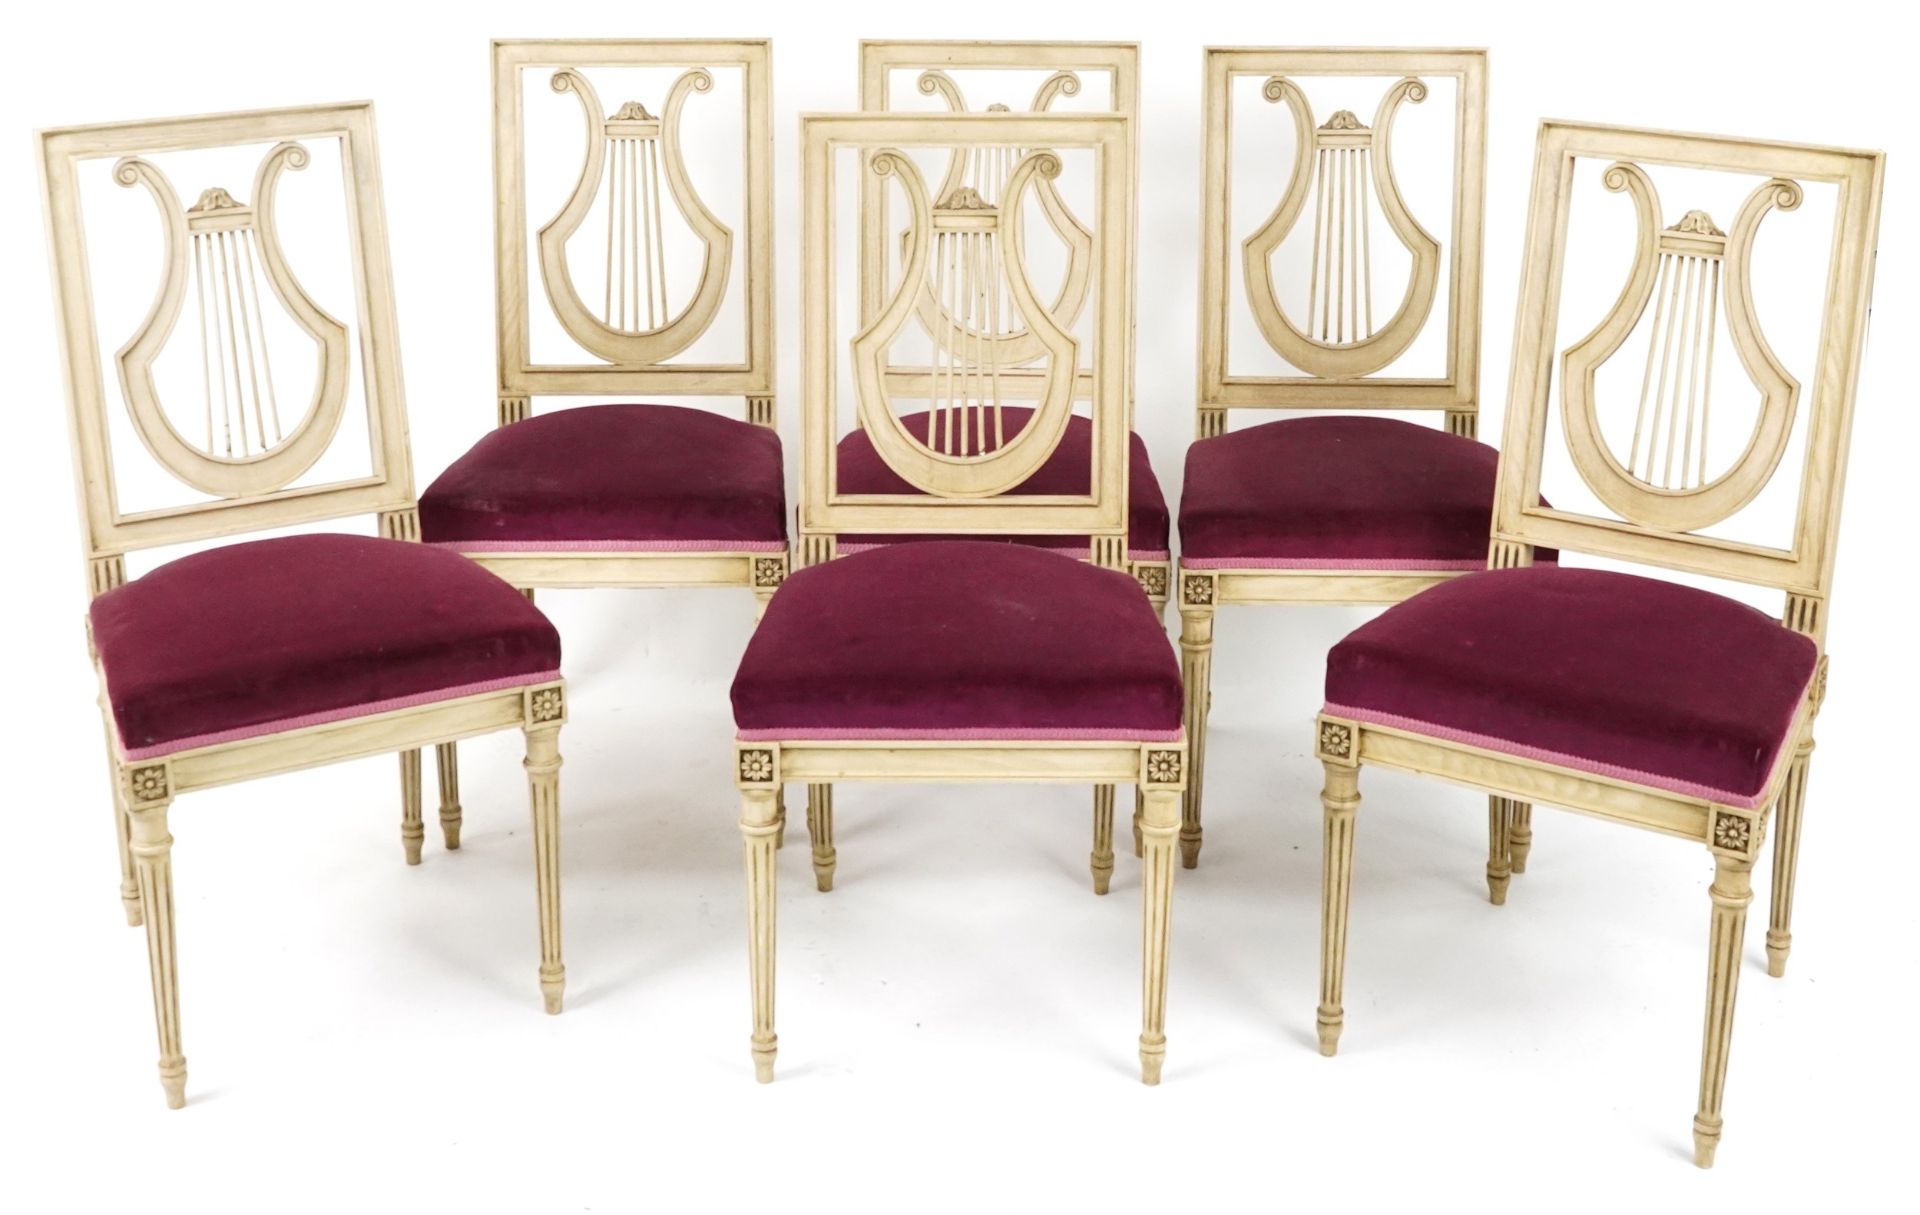 Set of six French cream painted dining chairs with lyre backs, pink upholstered seats on fluted